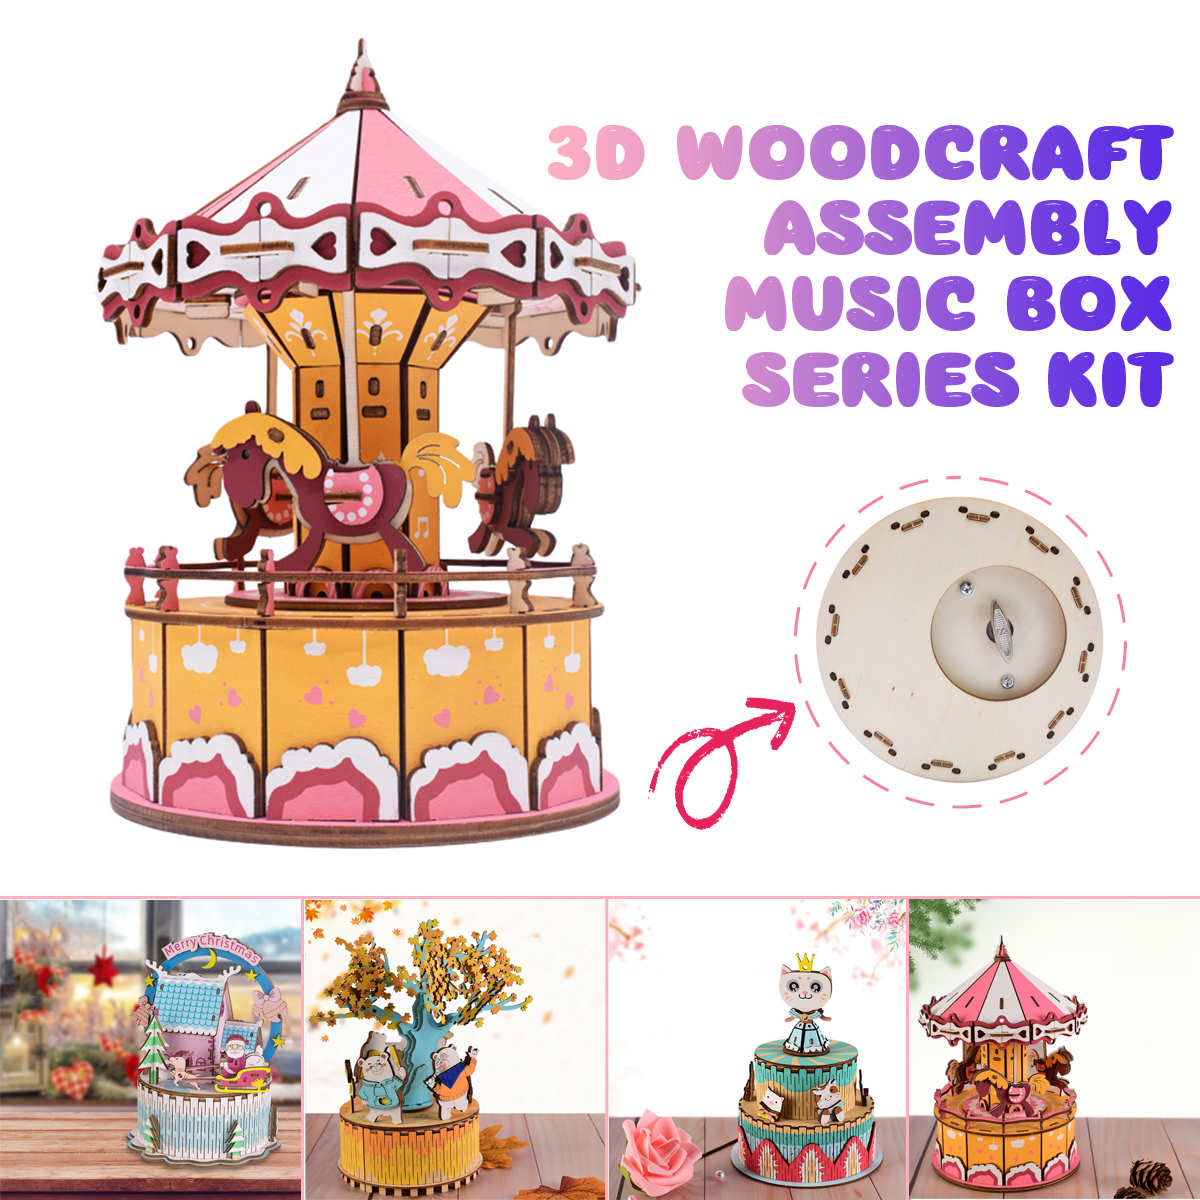 3D-Woodcraft-Assembly-Music-Box-Series-Kit-Jigsaw-Puzzle-Decoration-Toy-Model-for-Kids-Gift-1635634-1